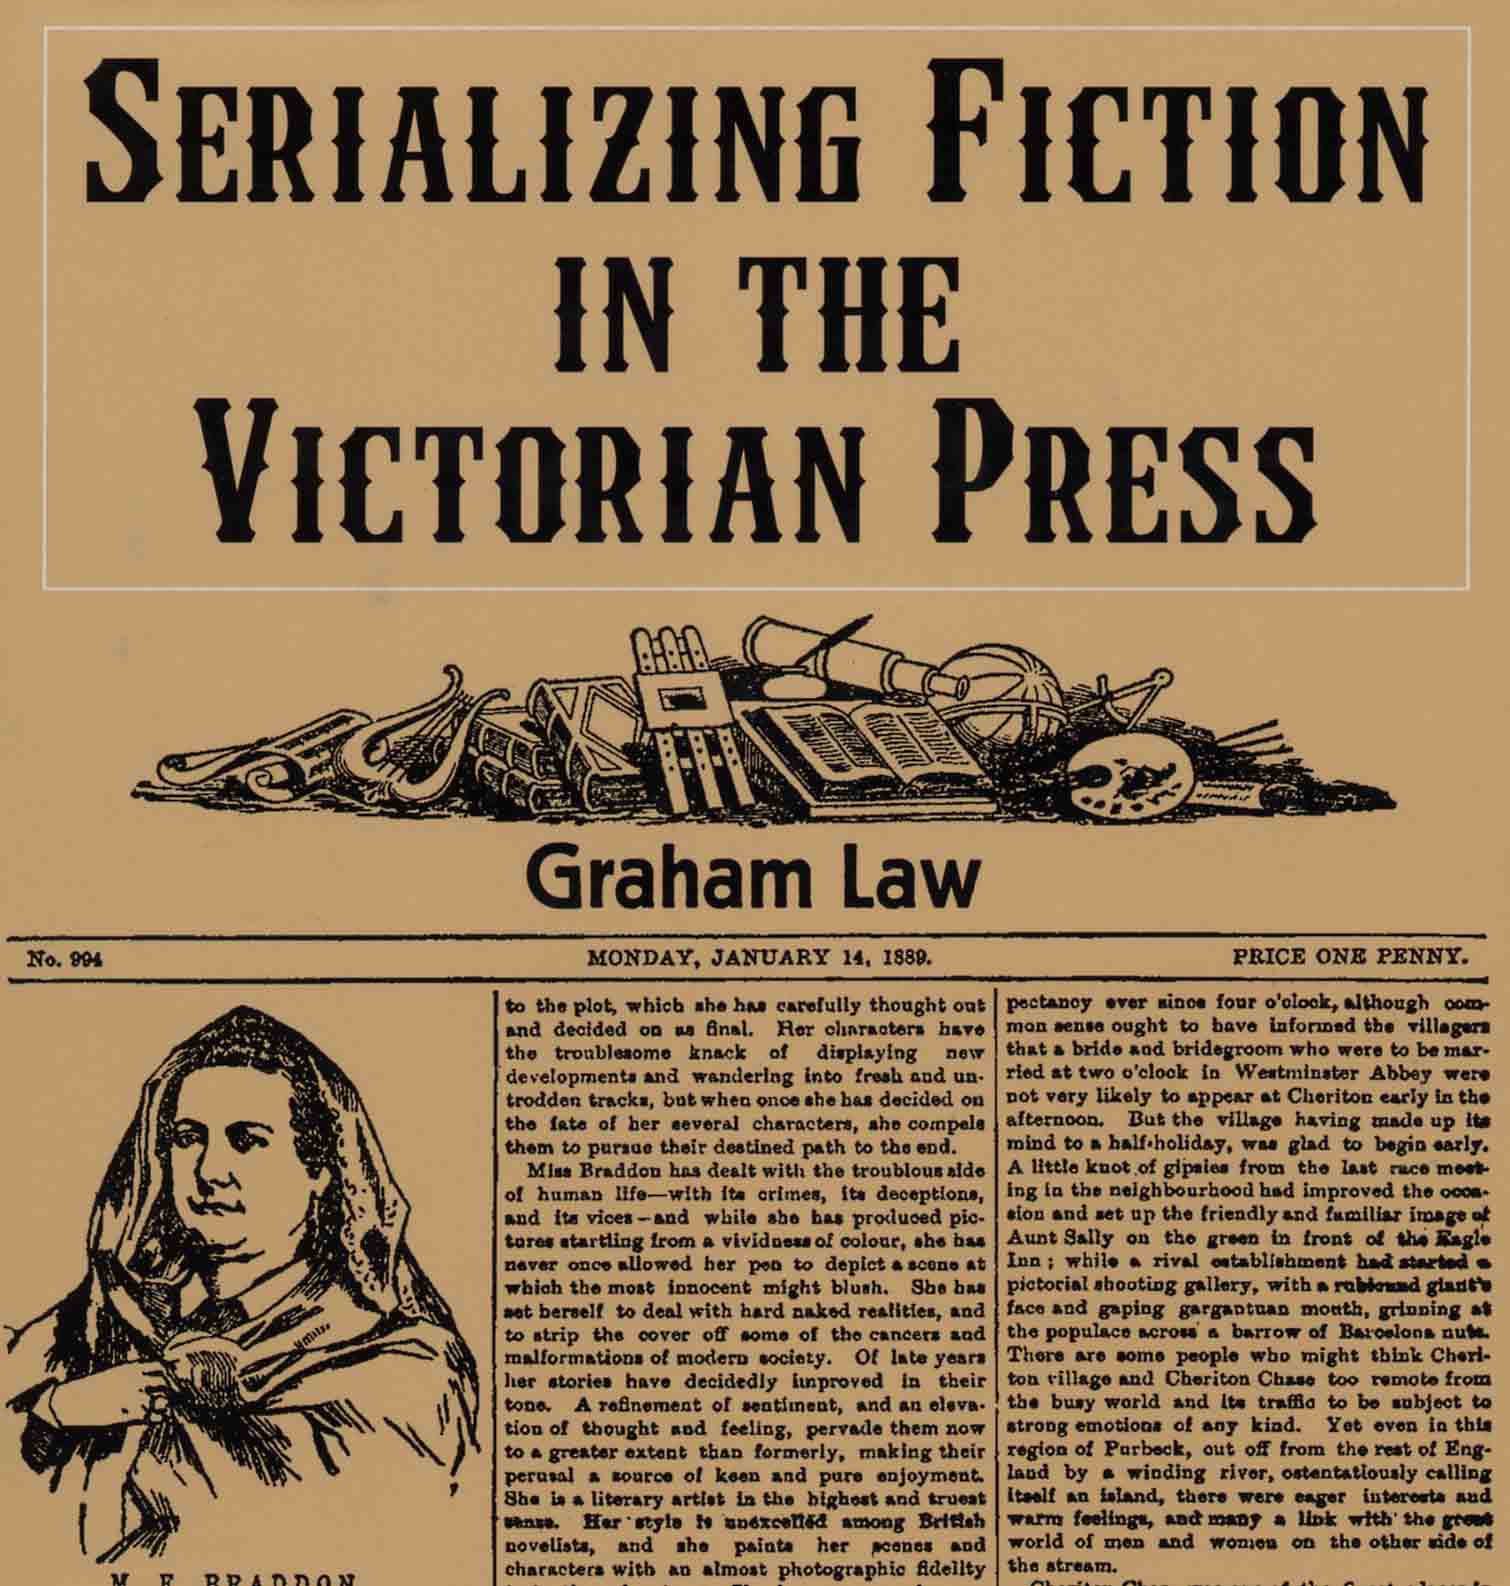 Serializing fiction in the Victorian Press - Graham Law